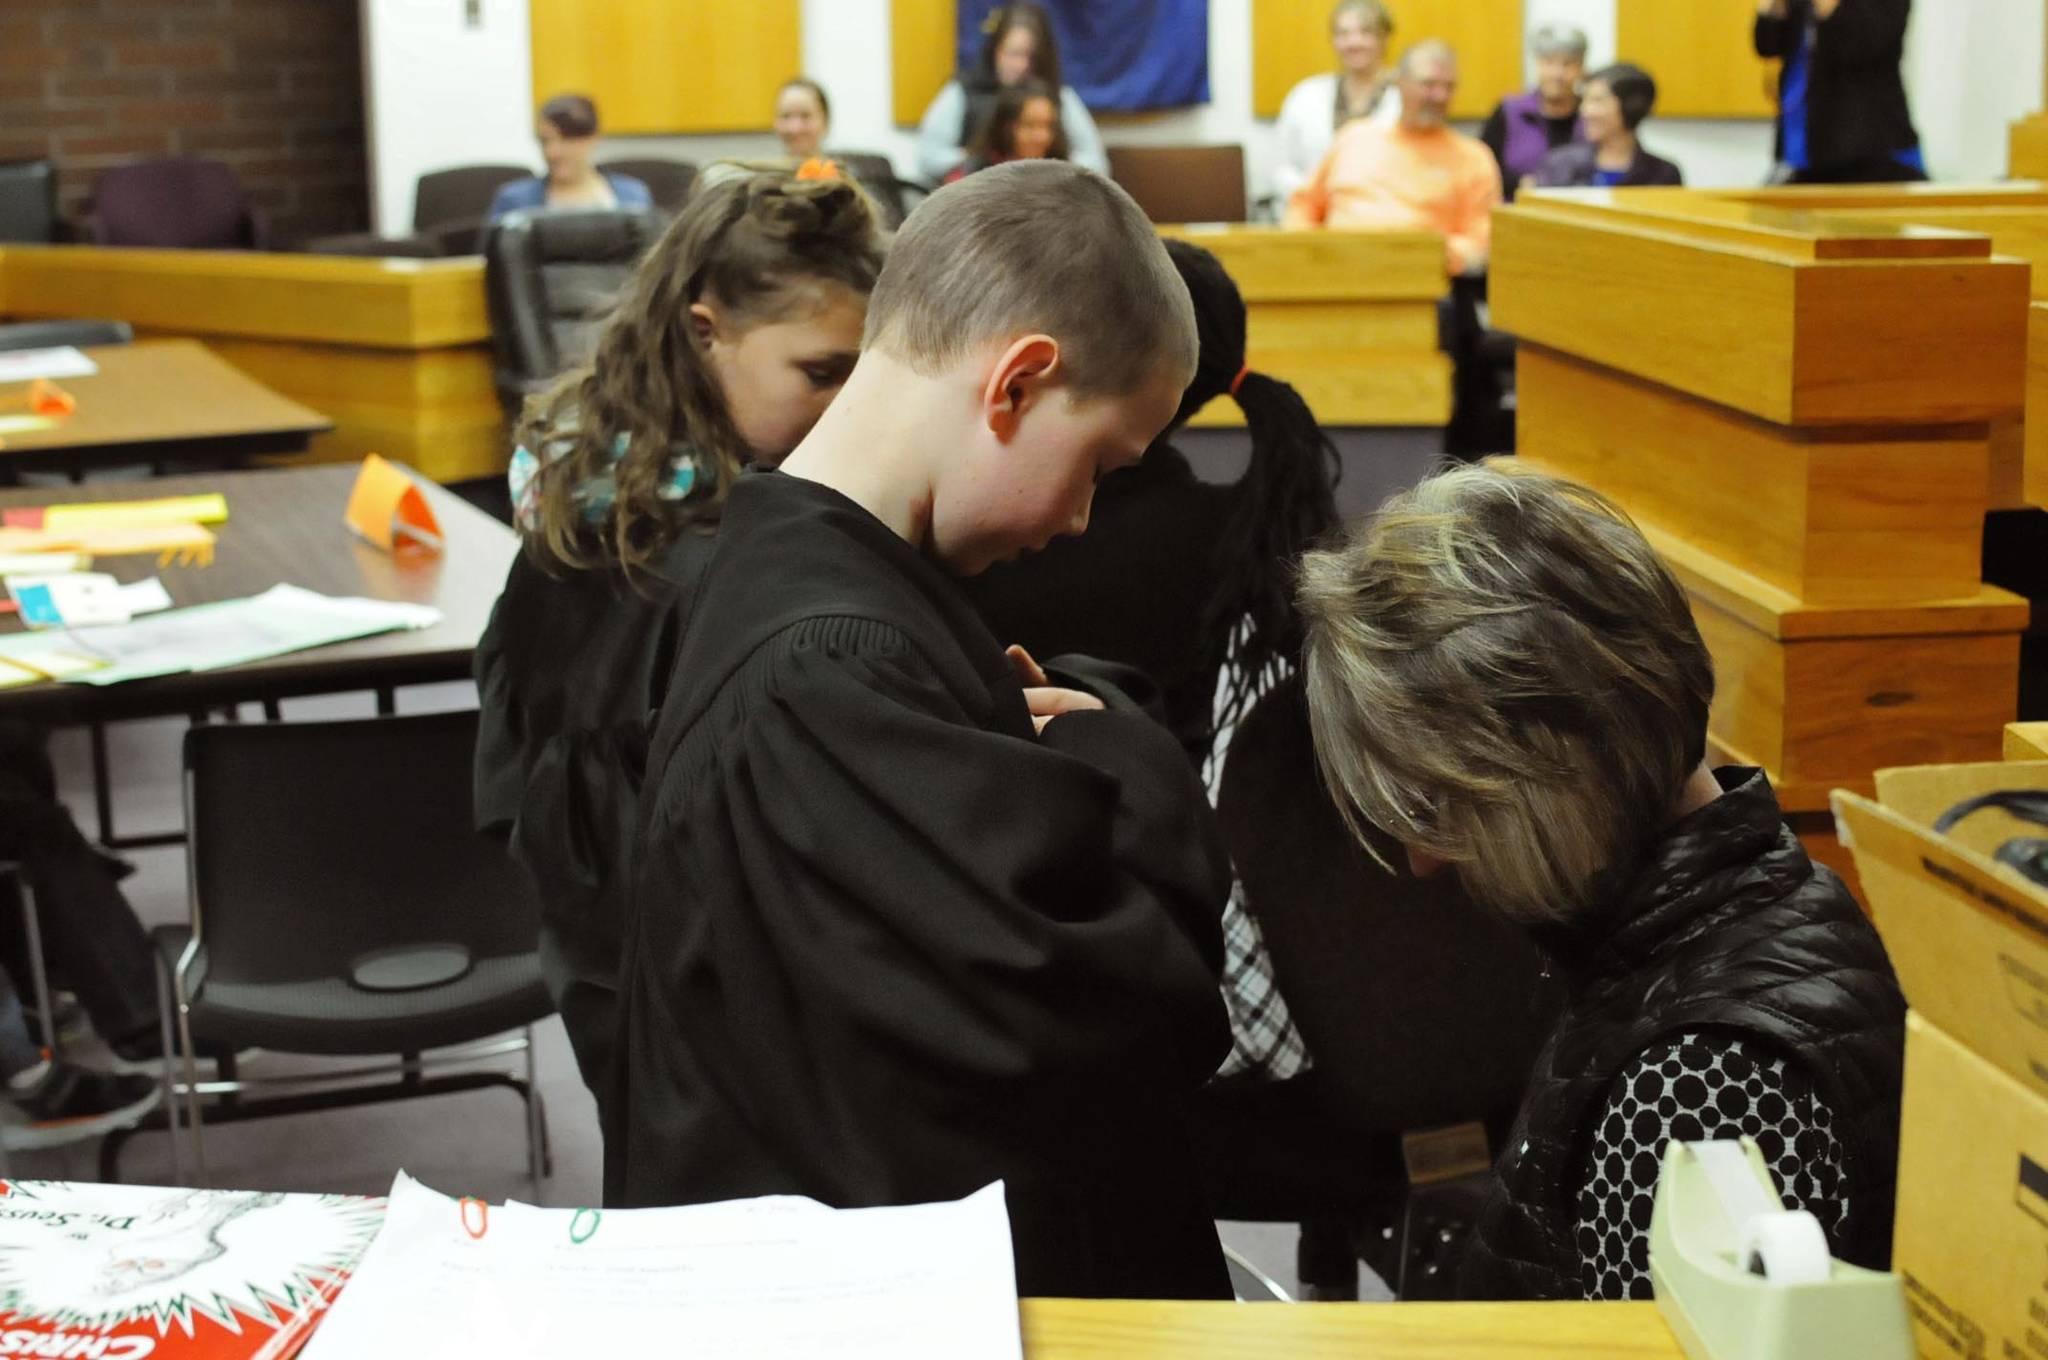 Kalifornsky Beach Elementary School 2nd grade teacher Kelly Brewer helps student Levi Kirby into his judge’s robes before the class begins its mock trial of “Arthur T. Grinch” based on the Dr. Seuss classic “How the Grinch Stole Christmas” on Thursday in Kenai. The class has been studying civics and learning about the court process and put on a mock sentencing hearing, complete with witnesses and a jury composed of students’ parents and K-Beach Elementary Principal Nate Crabtree. (Photo by Elizabeth Earl/Peninsula Clarion)